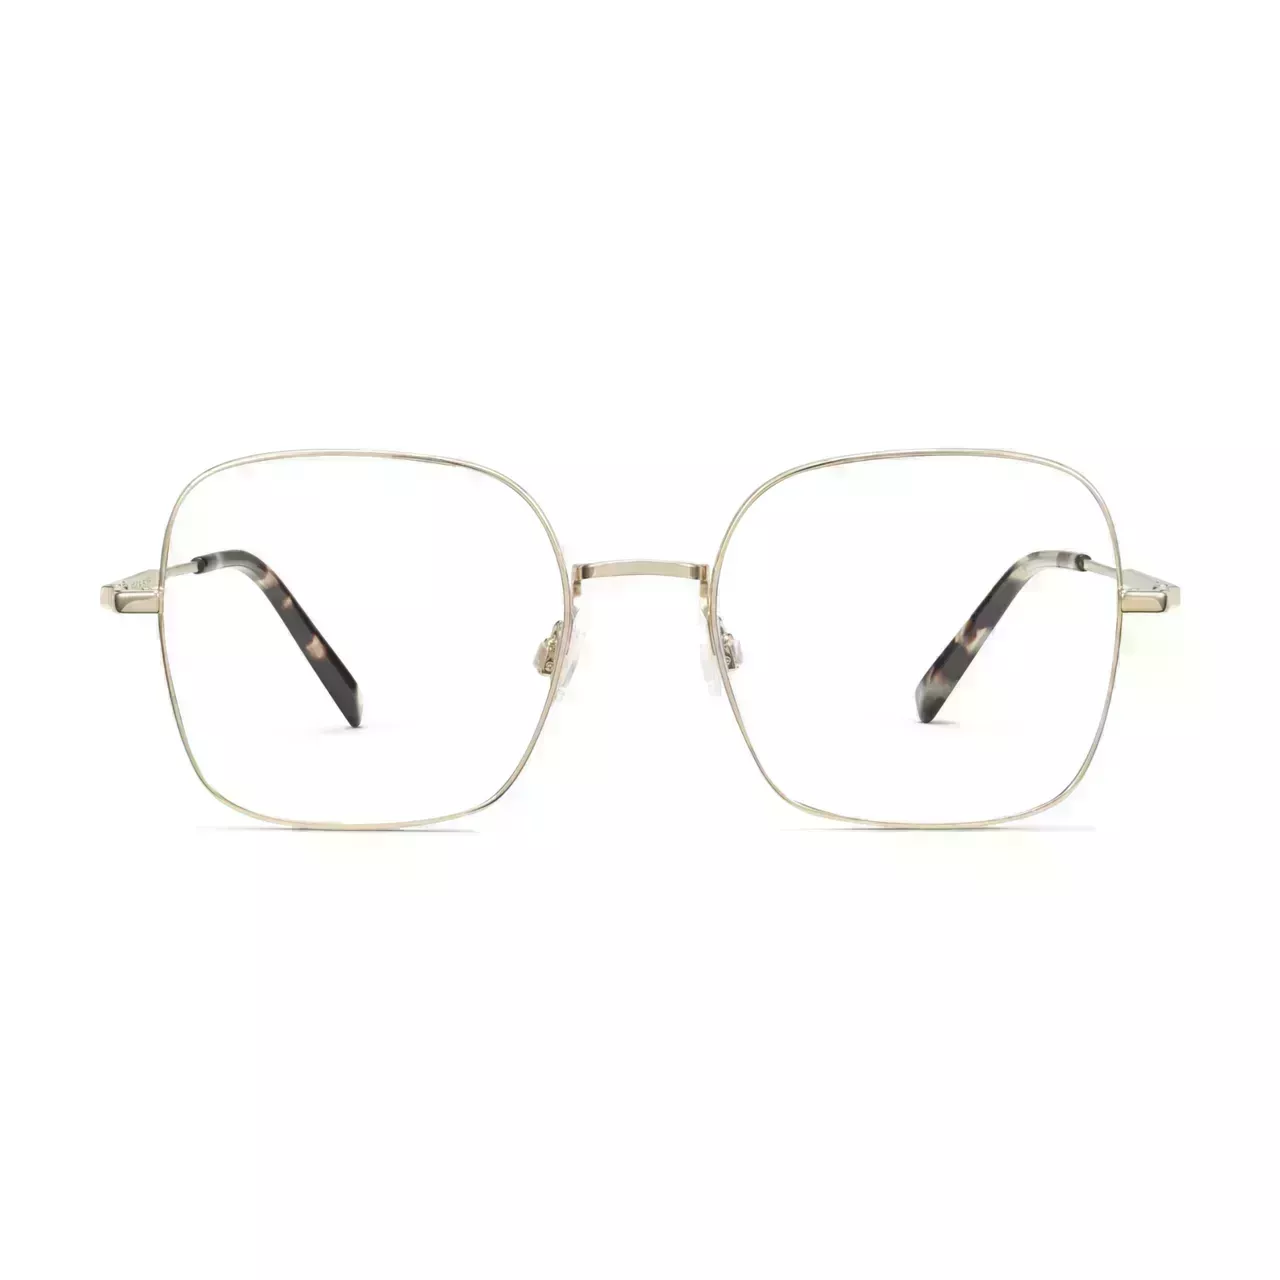 Warby Parker Aniyah gold square glasses on white background